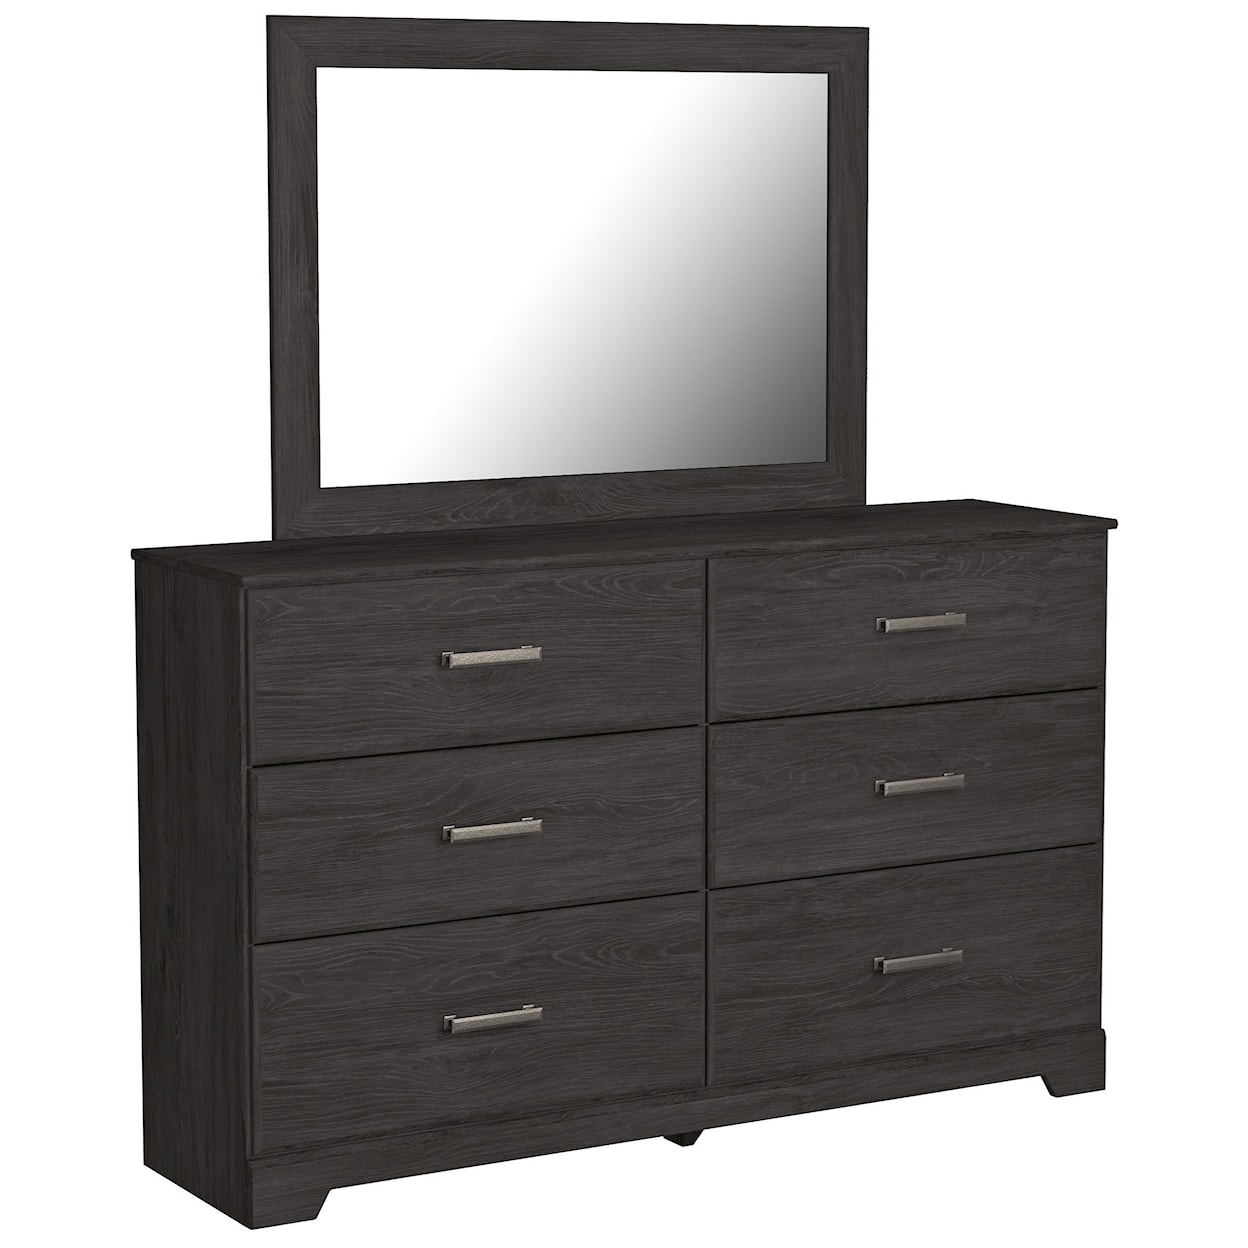 Signature Design by Ashley Belachime Bedroom Mirror